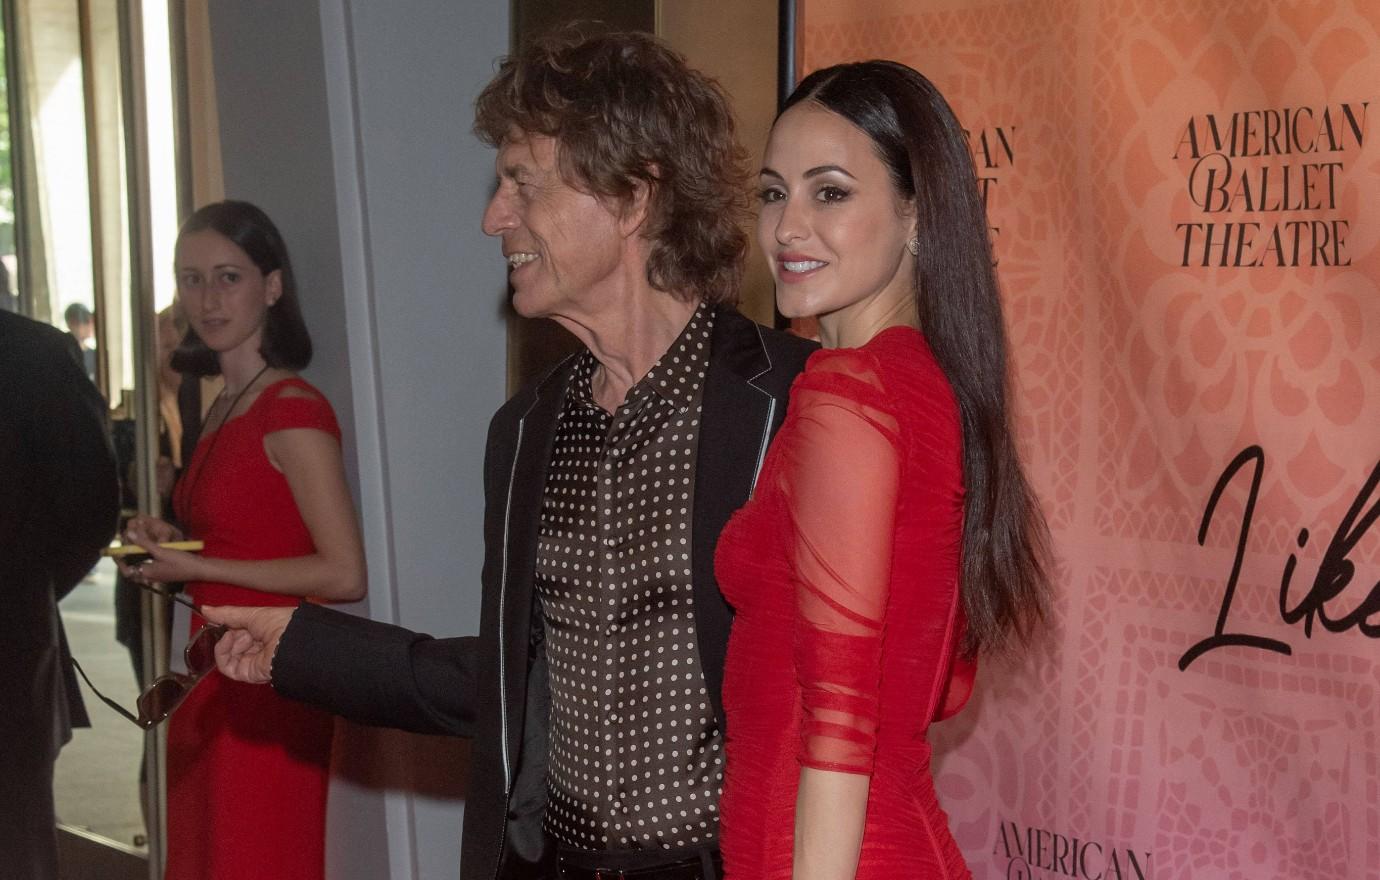 Mick Jagger 79 Engaged For The Third Time To Melanie Hamrick 36